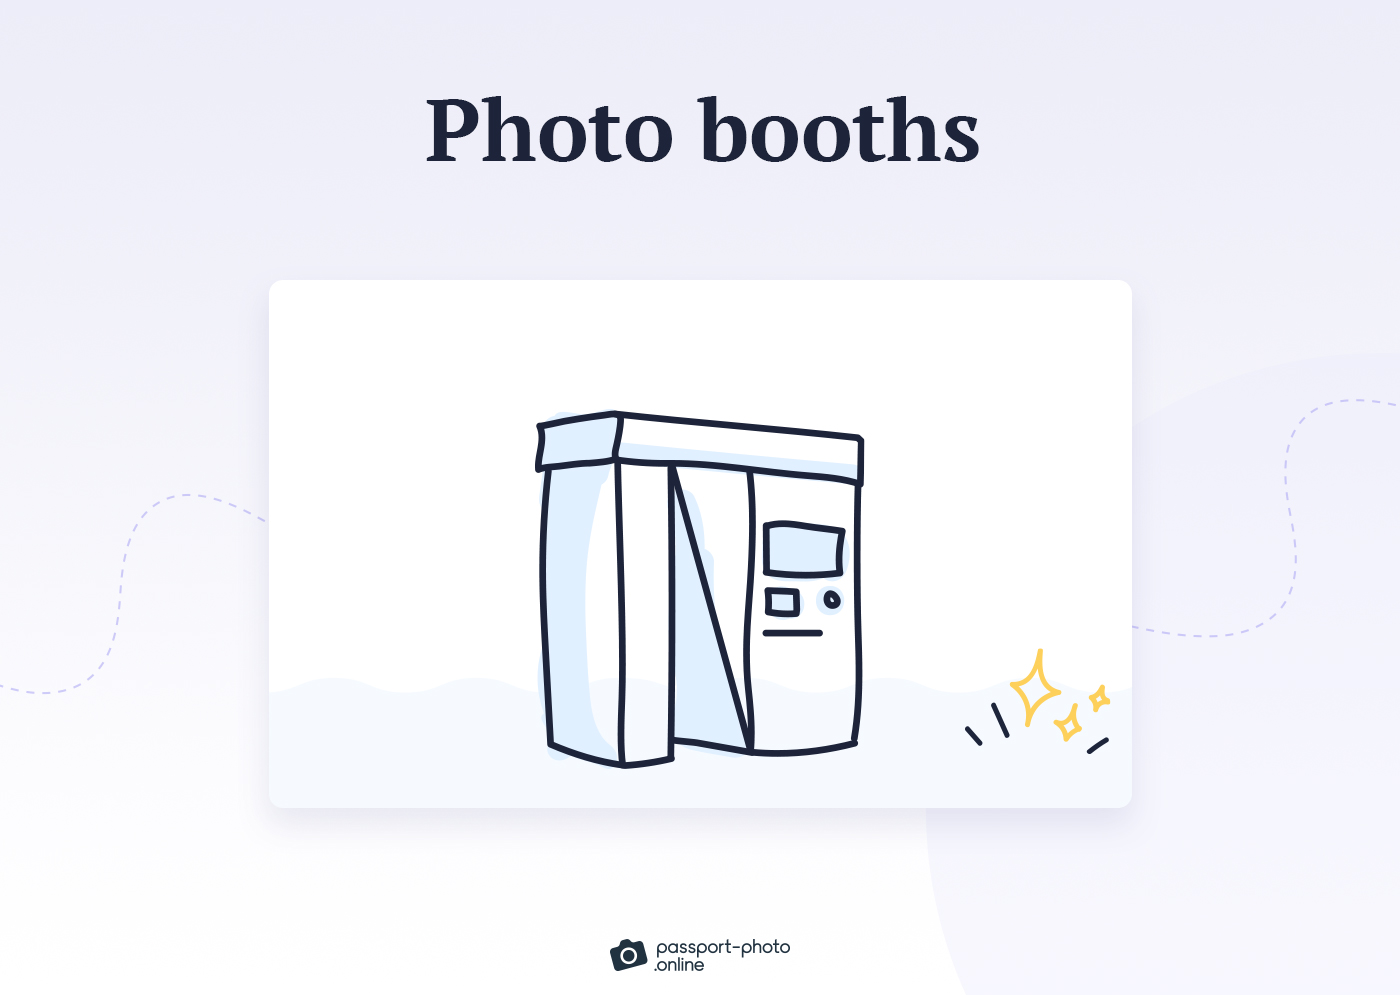 Photo booths allow customers to get their passport photos done in high-traffic areas such as shopping malls.